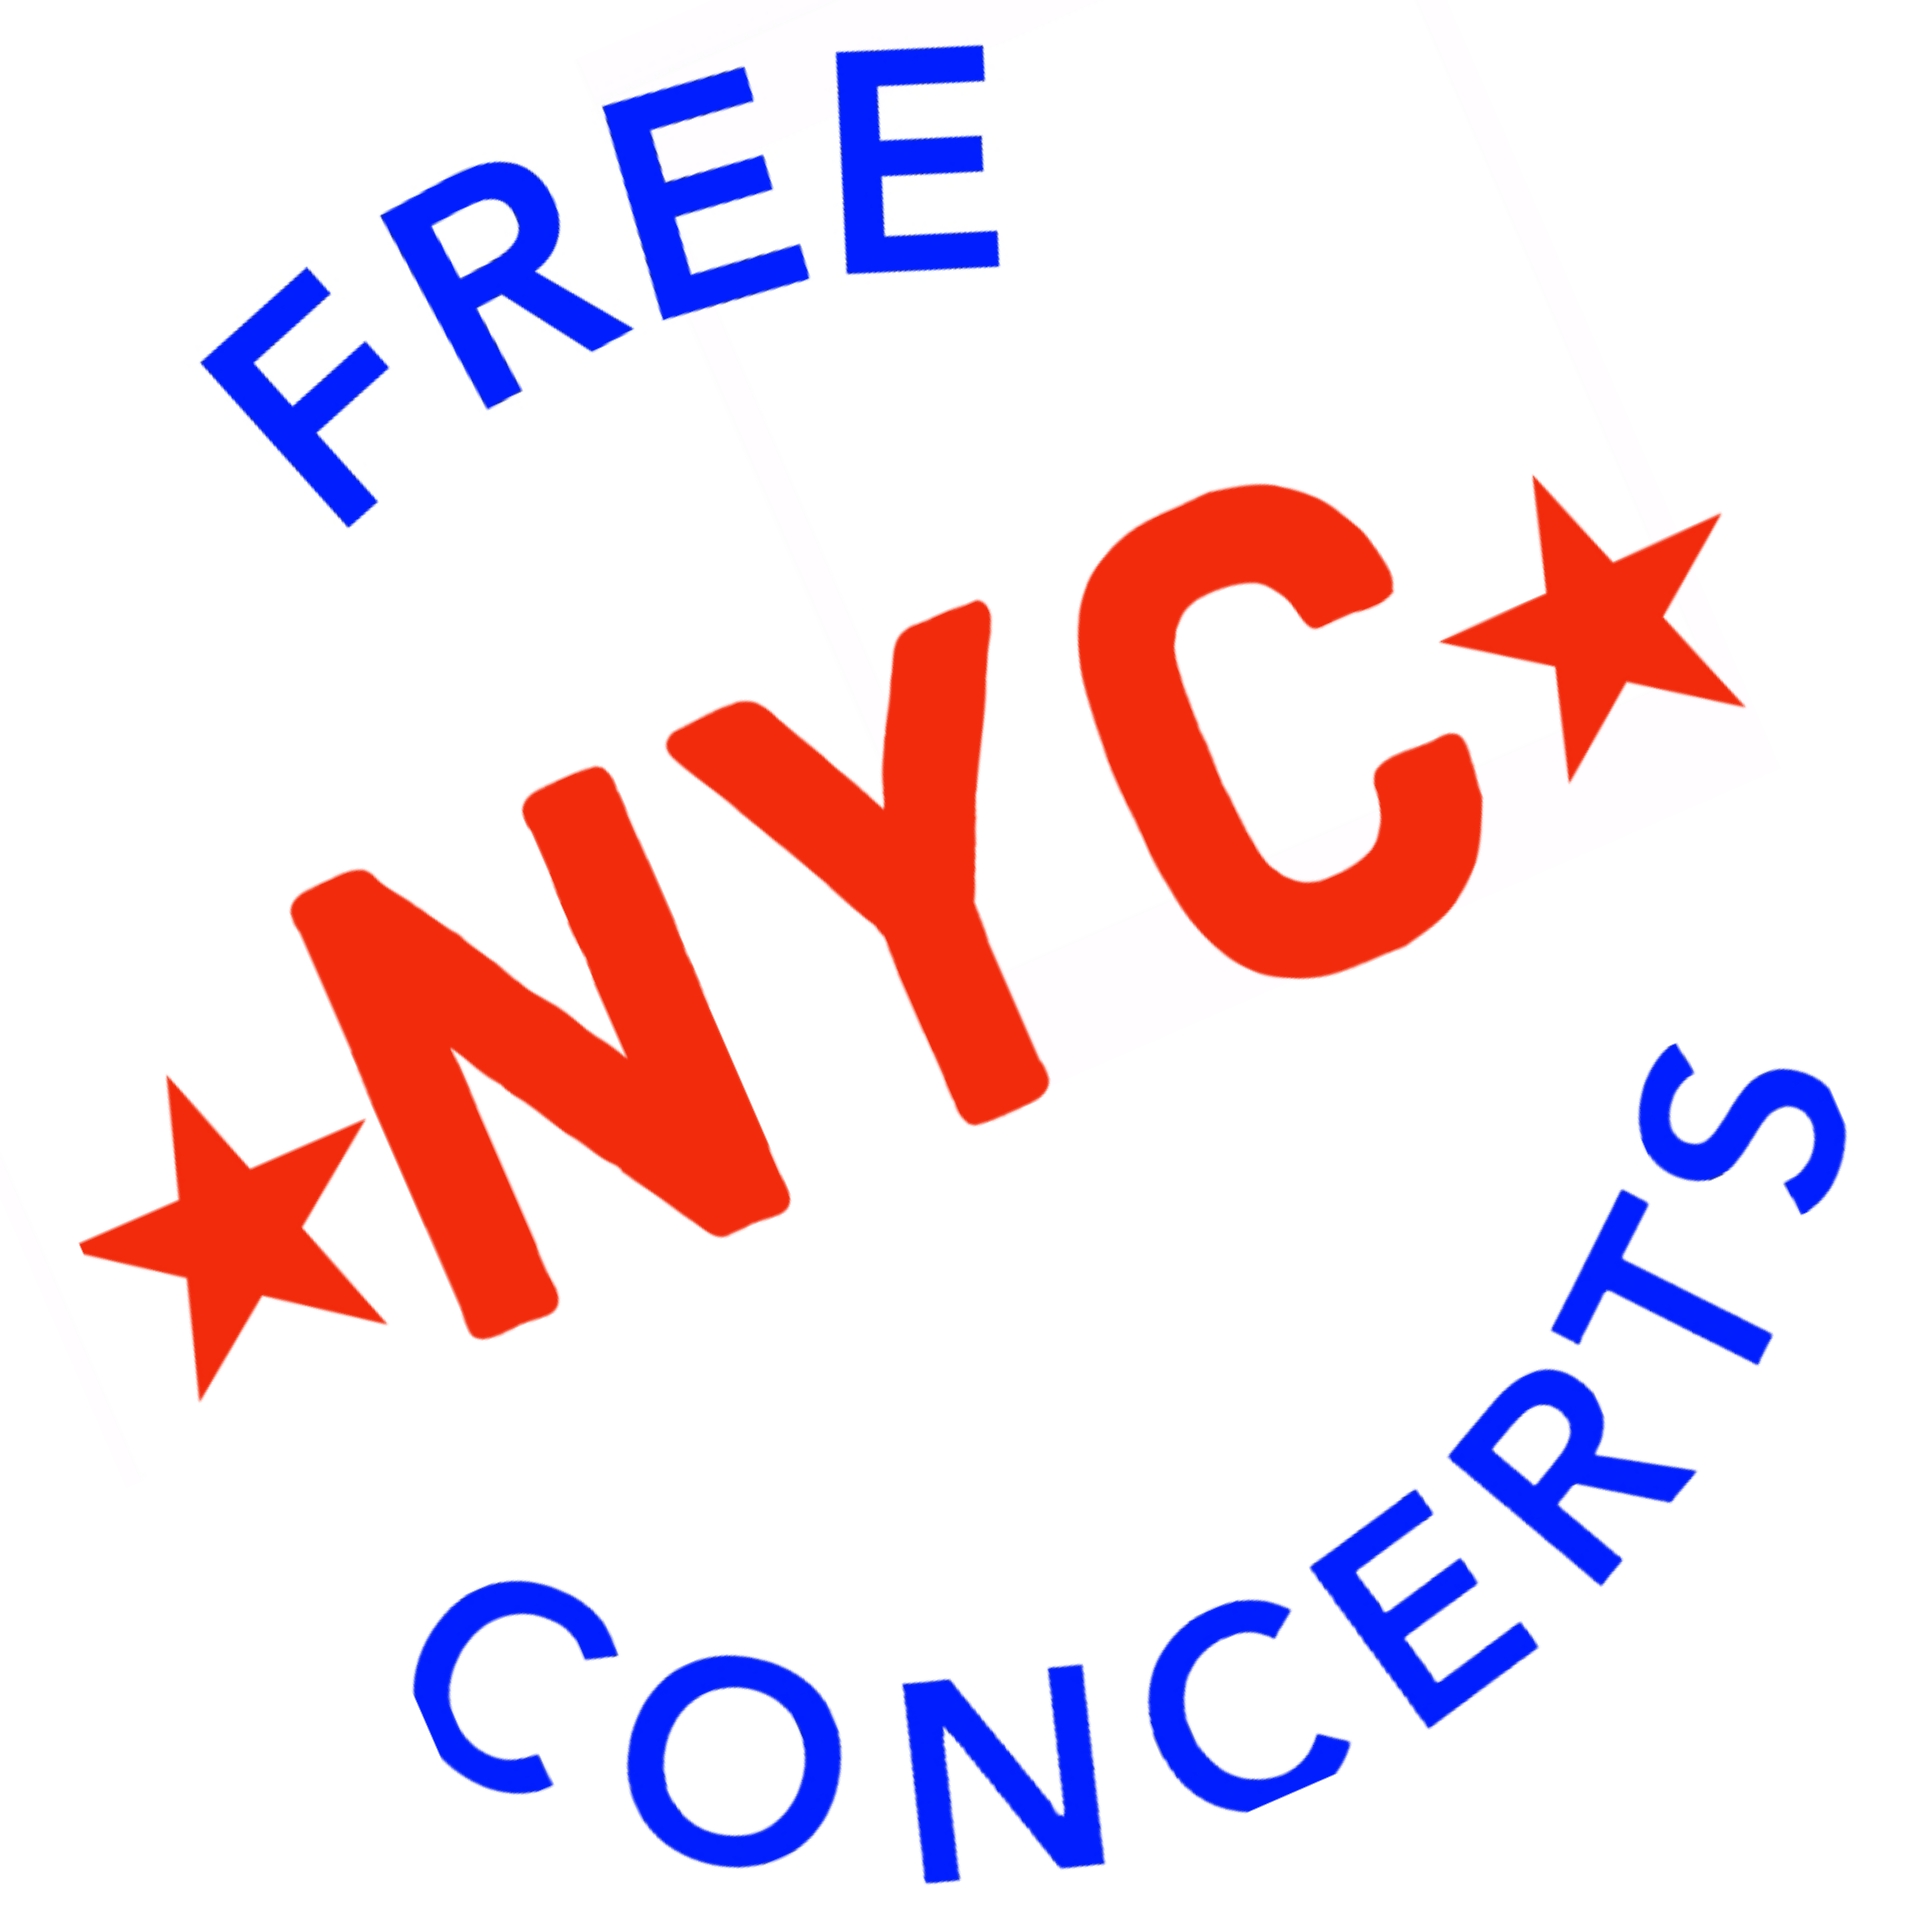 NYC Free Concerts